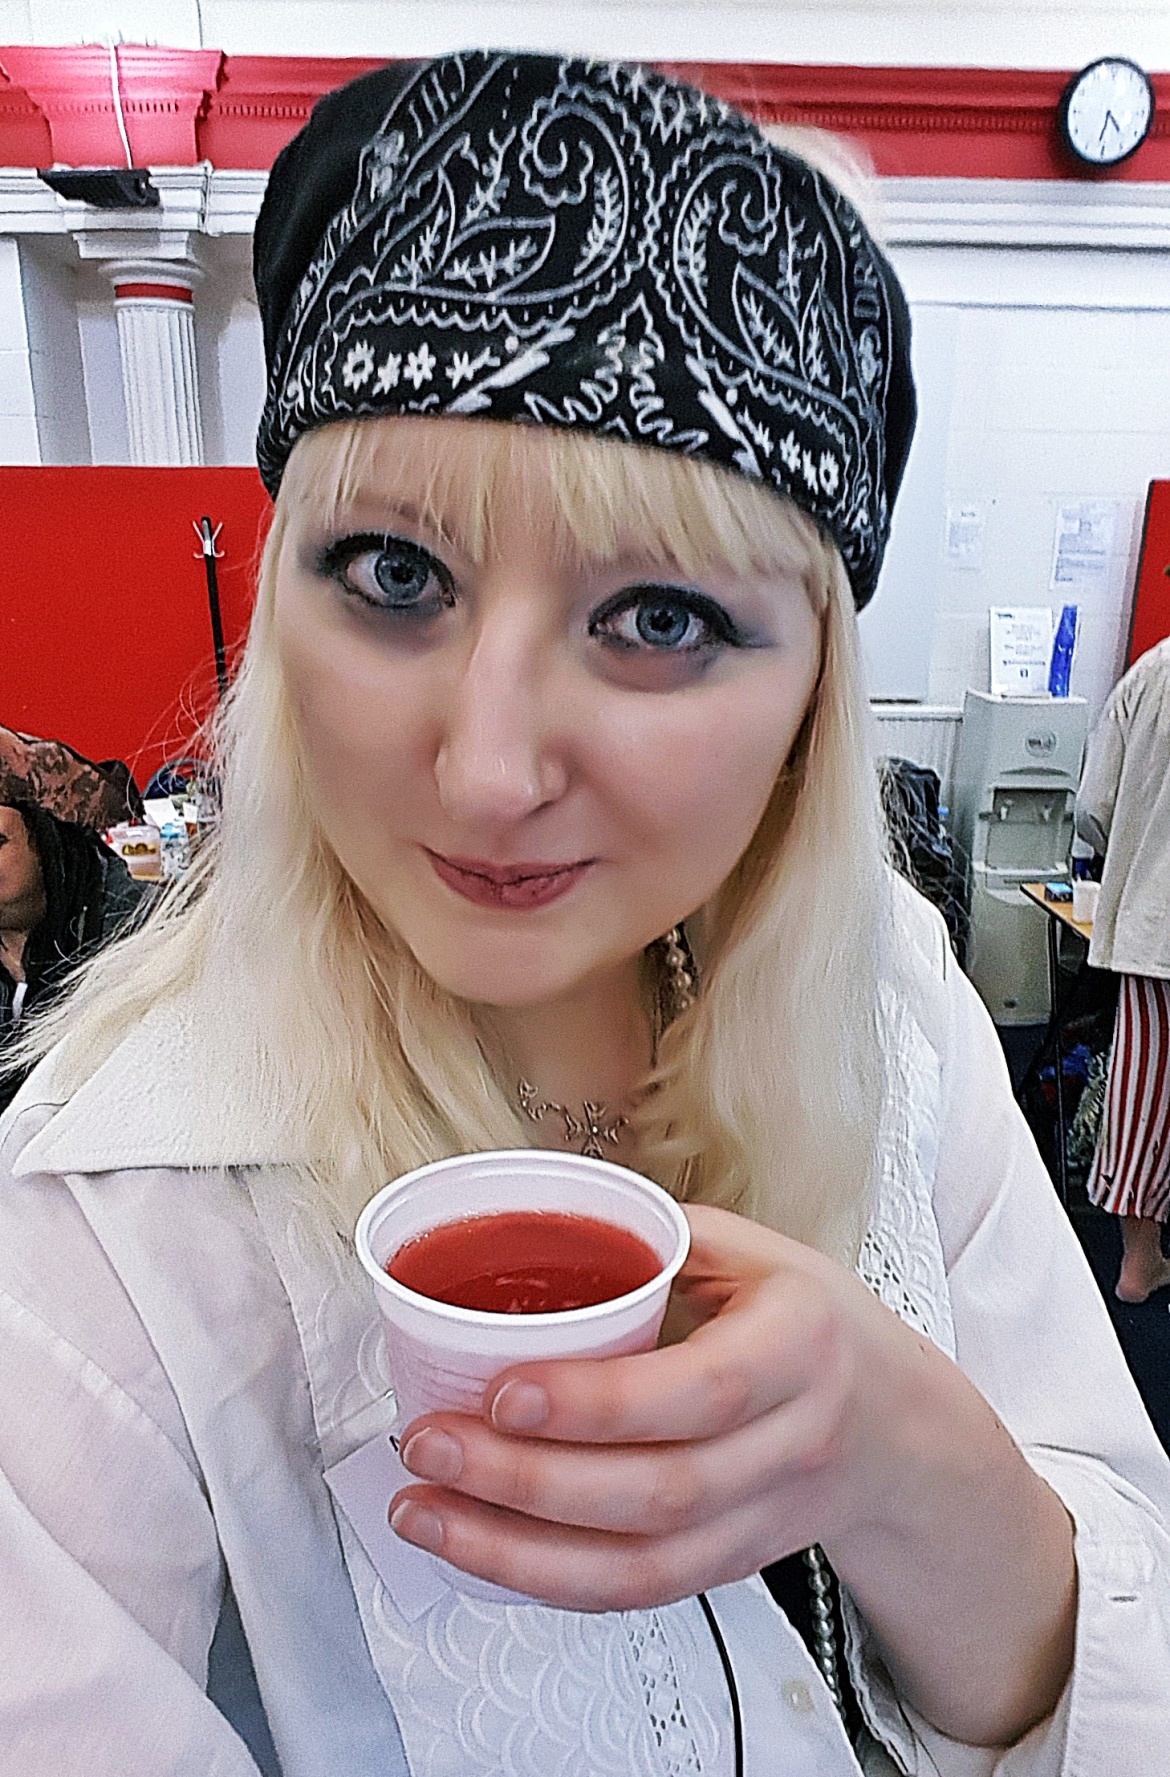 Serving up daiquiris - The Pirate Republic Megagame After Action Report by BeckyBecky Blogs